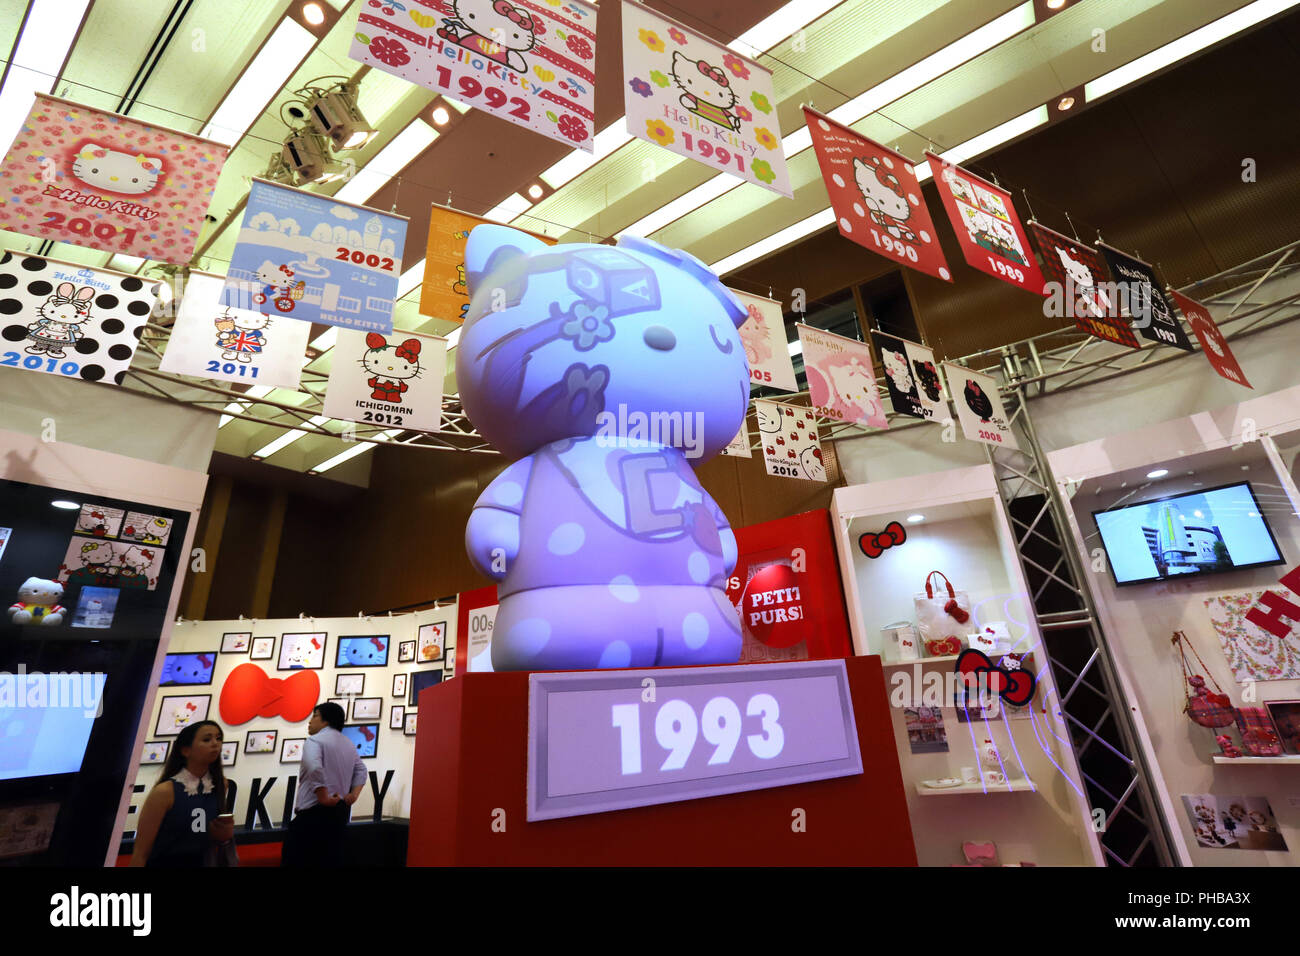 August 31, 2018, Tokyo, Japan - Japanese character giant Sanrio displays  Hello Kitty character goods at Sanrio's latest products exhibition "Sanrio  Expo 2018" at the company's headquarters in Tokyo on Friday, August